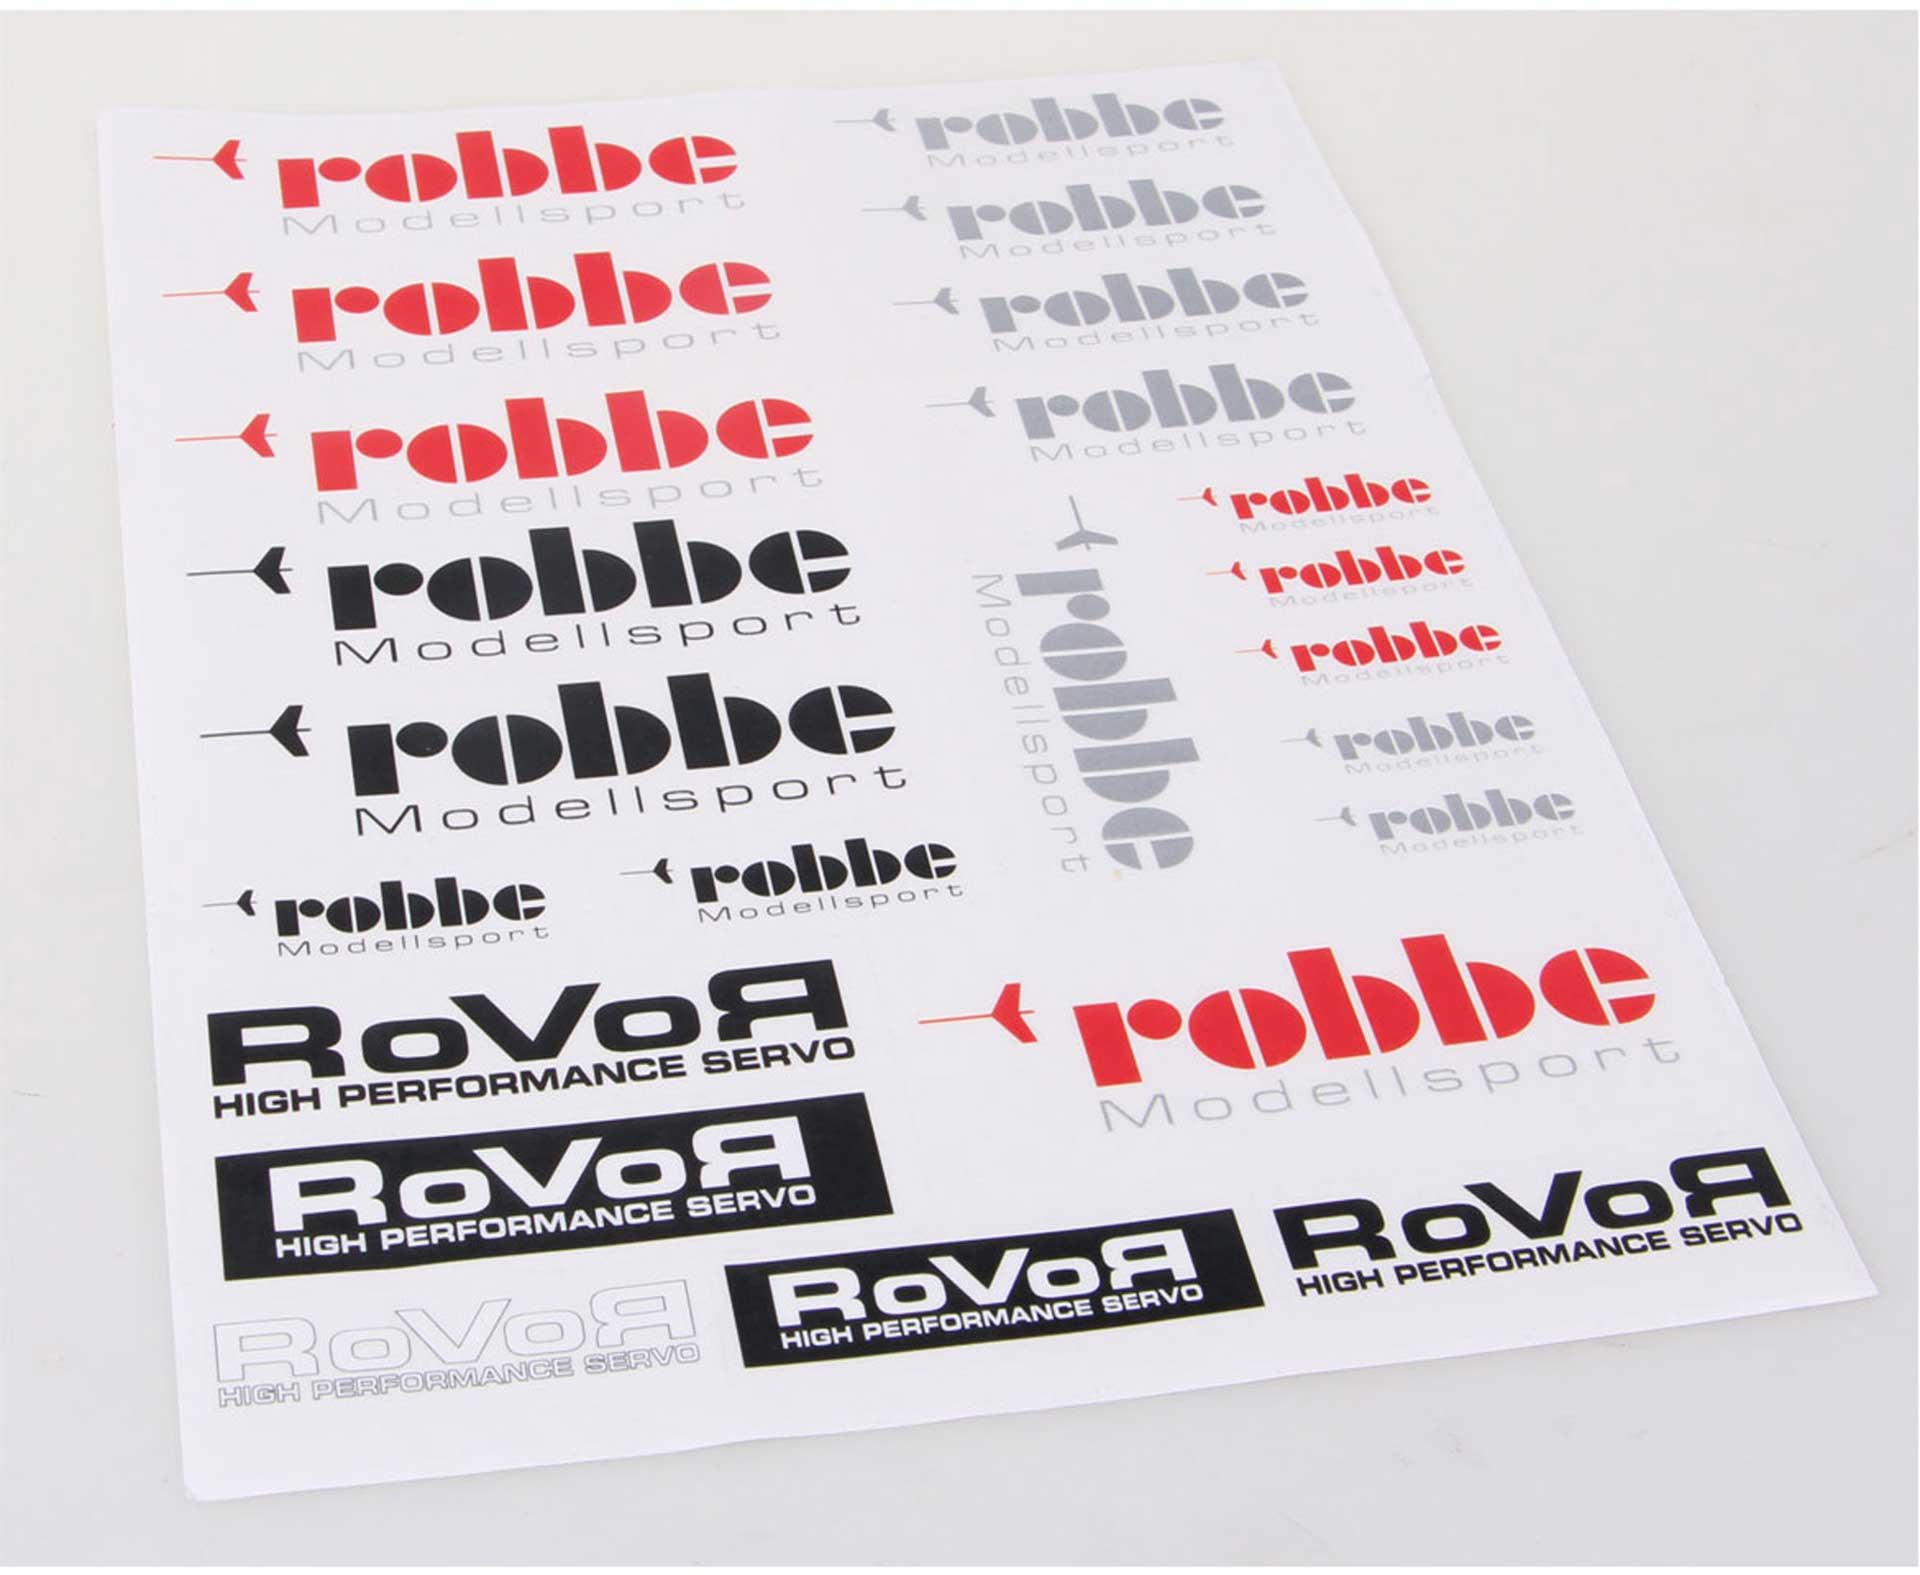 Robbe Modellsport ROBBE DECAL SHEET A5 WITH 23 STICKERS ROBBE, ROVOR ON TRANSPARENT FILM